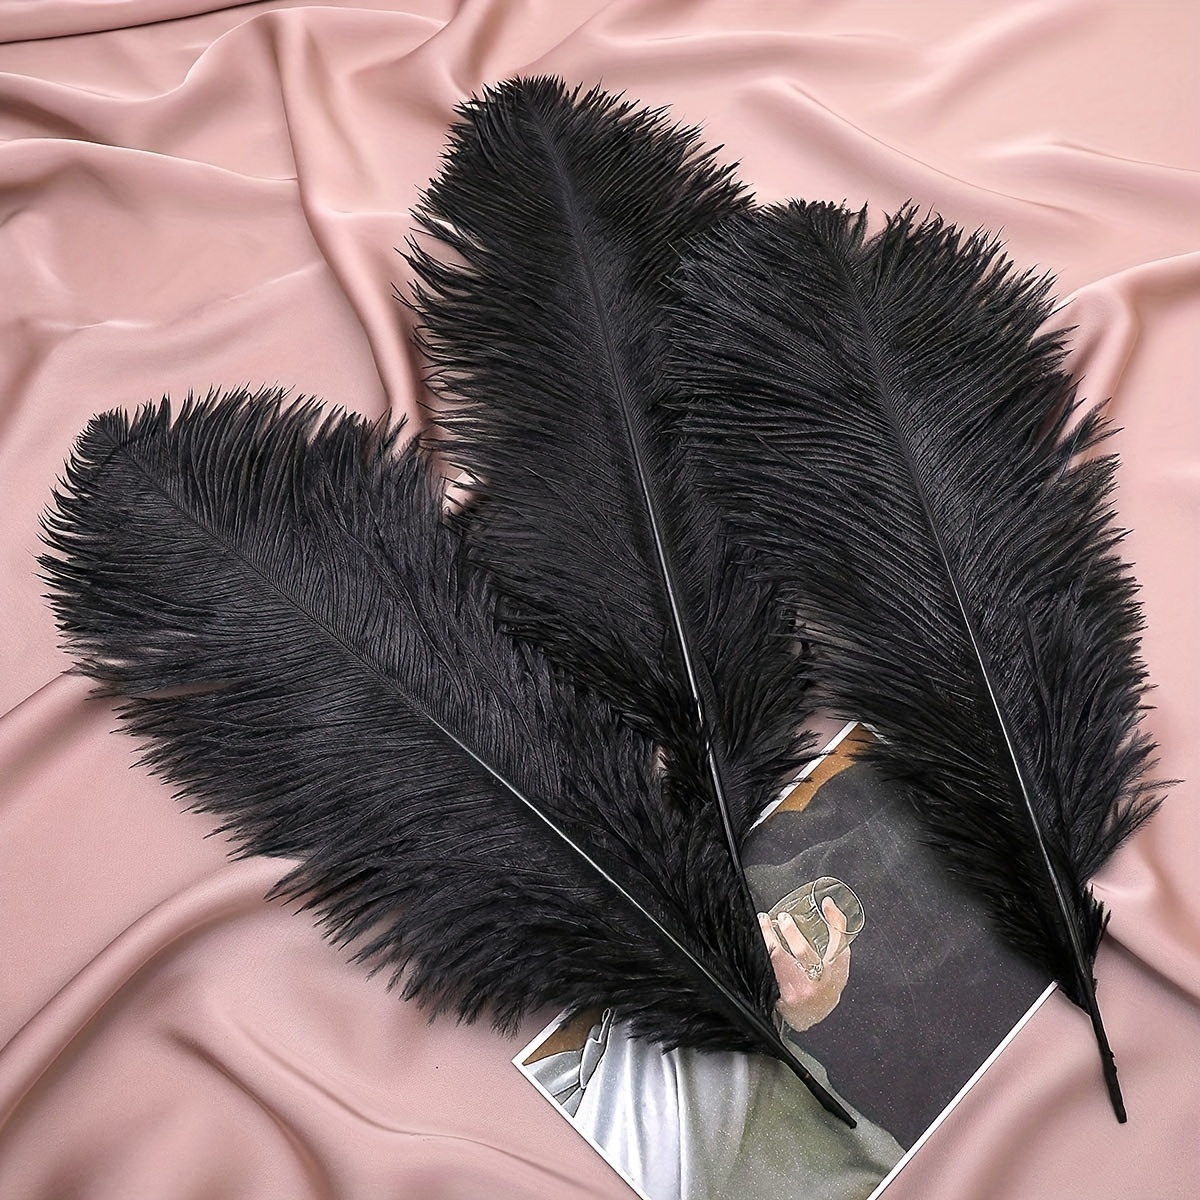 120pcs Black Feathers for Crafts 6-8 inch Natural Goose Feathers for Halloween Party Home DIY Decorations Cosplay Gothic Costumes Accessories